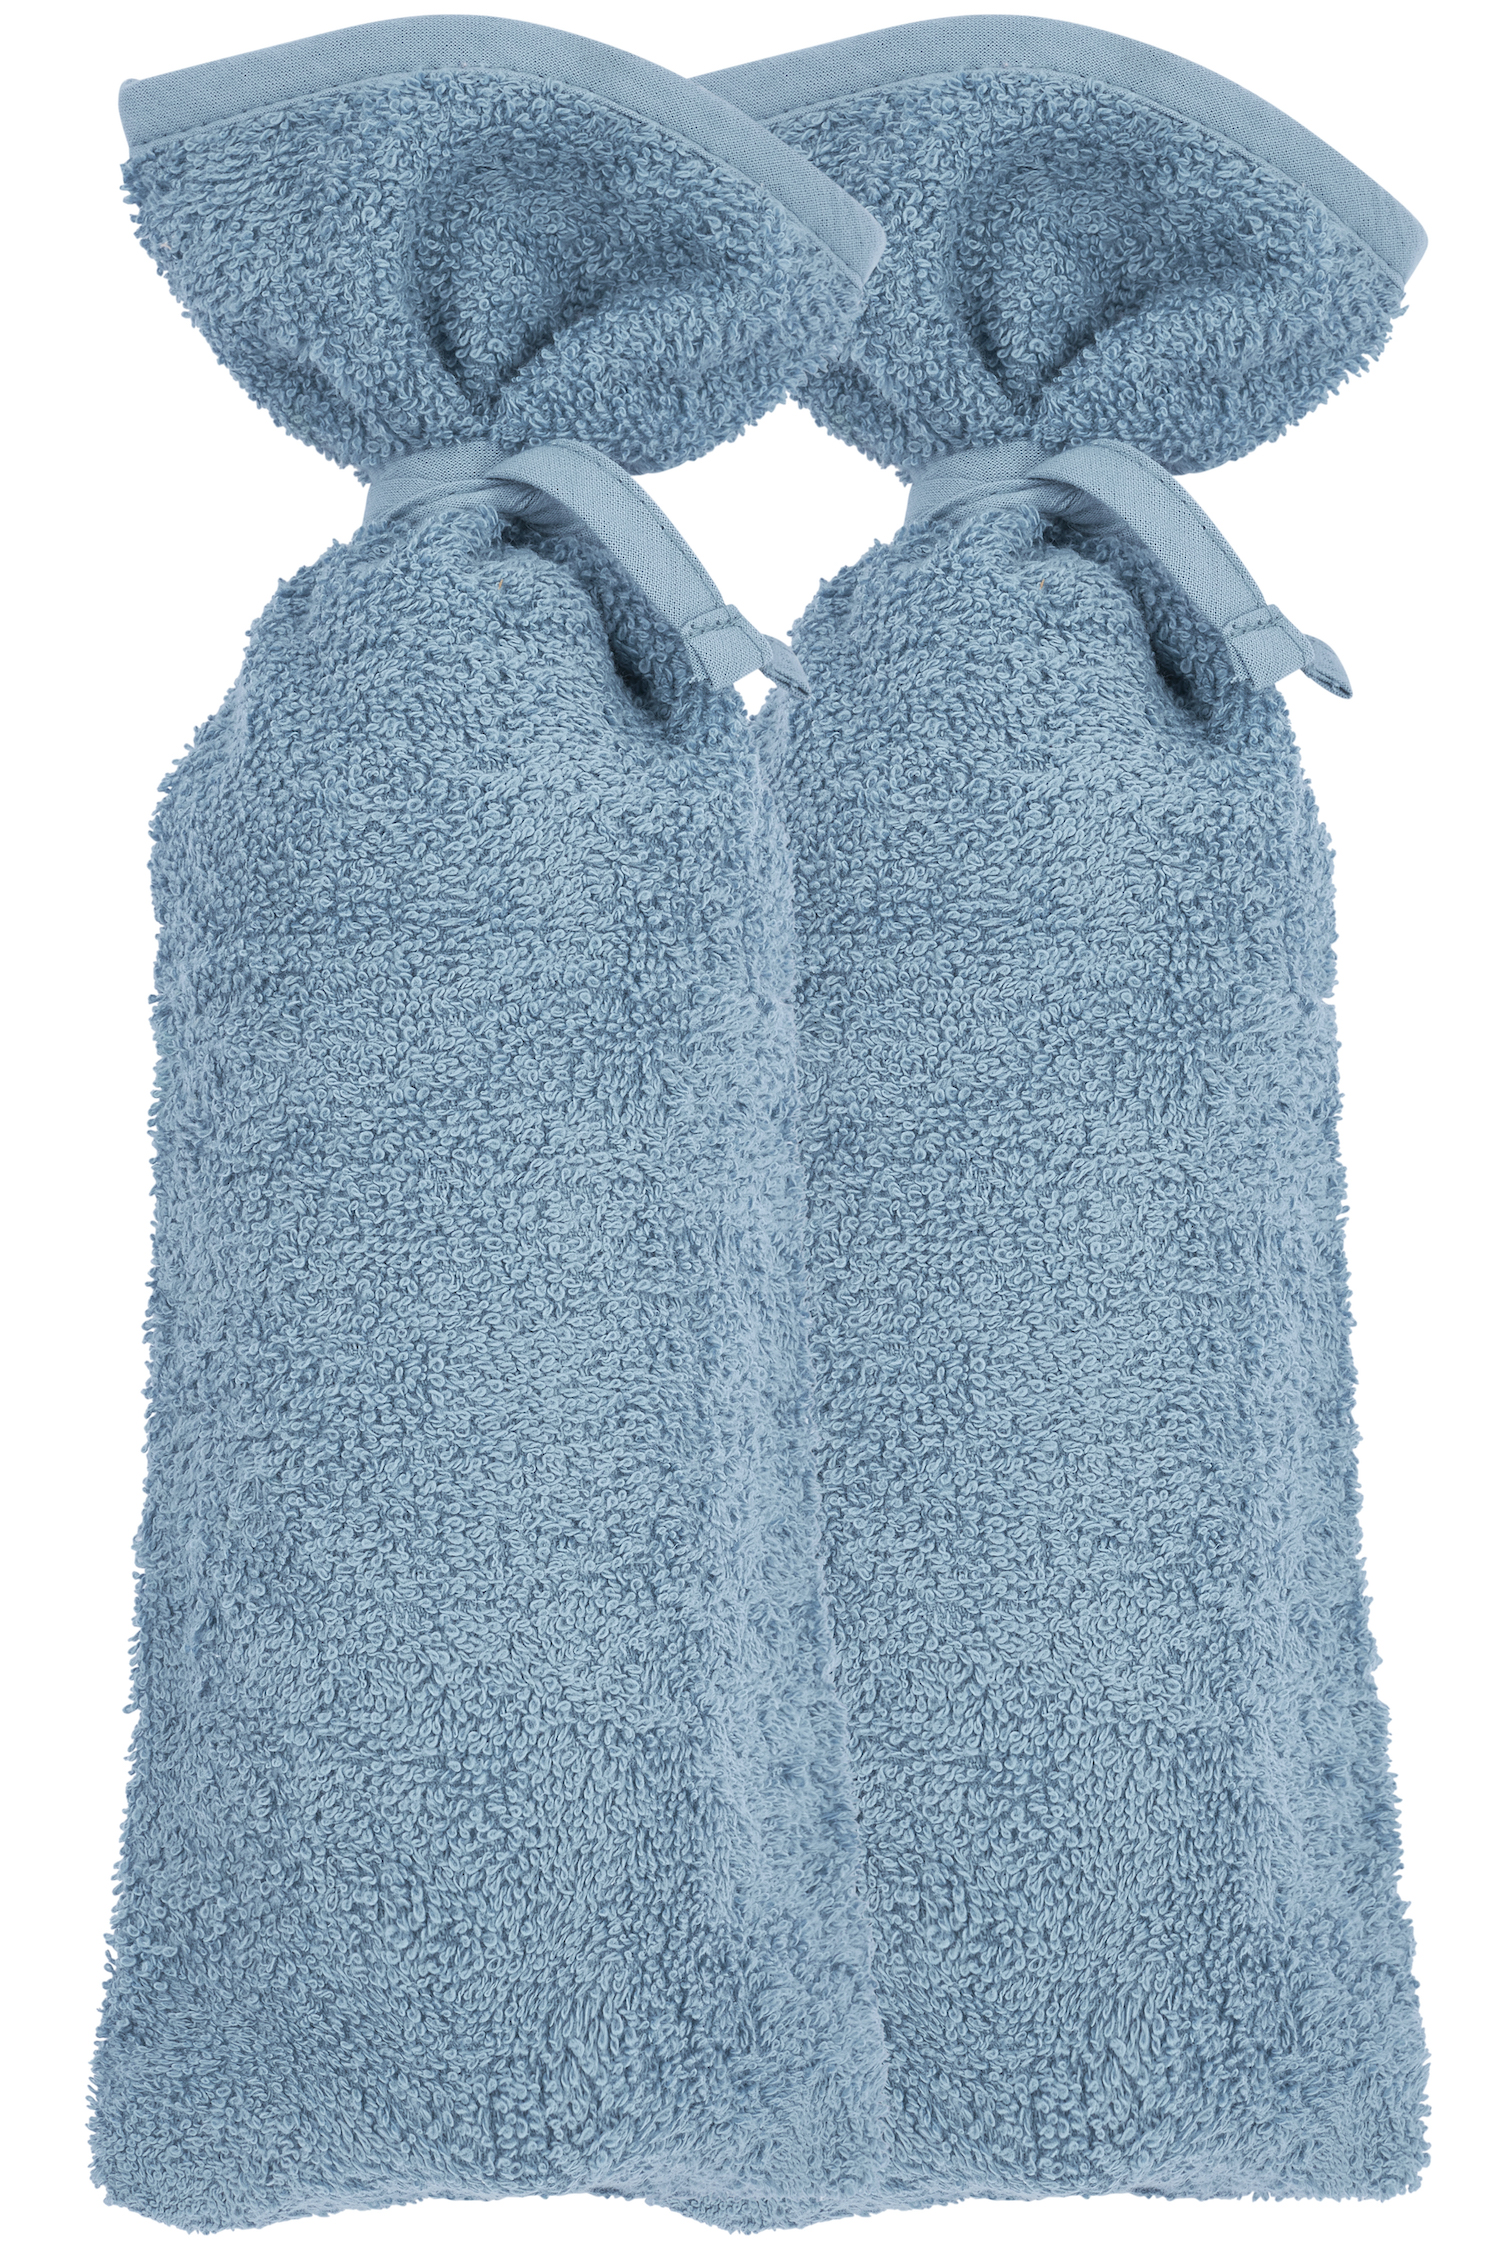 Hot Water Bottle Cover Basic Terry 2-pack - Denim - 13xh35cm